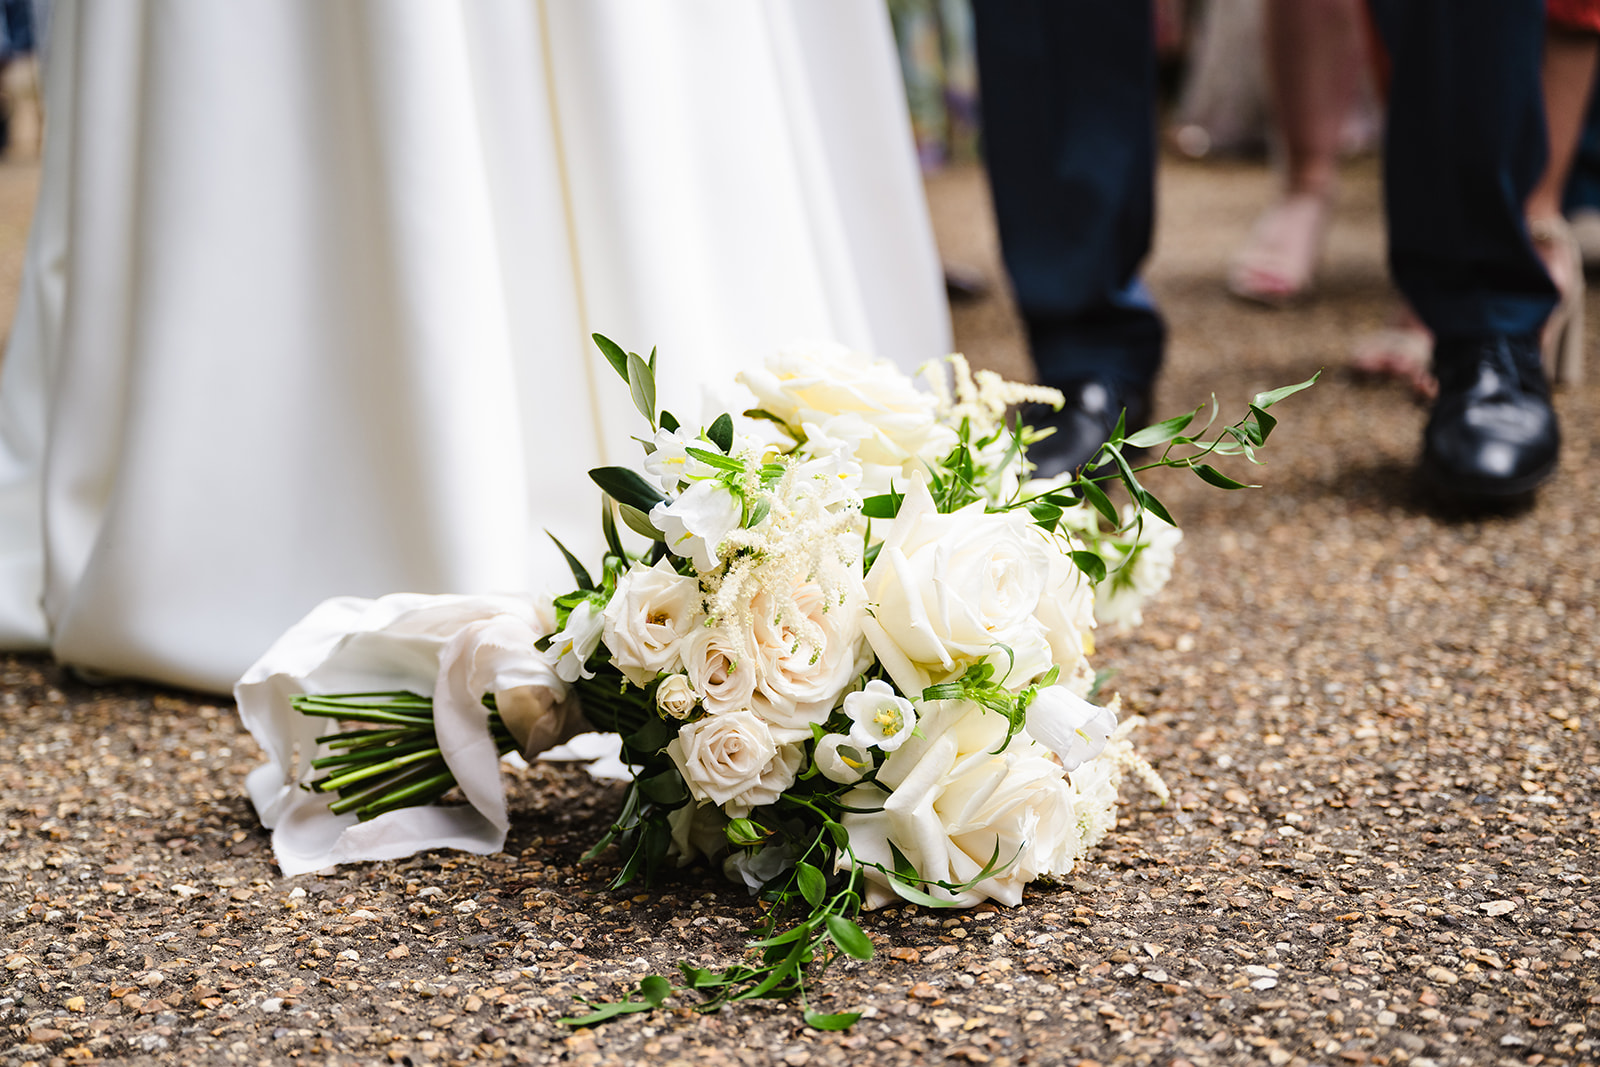 Brides flowers resting at her feet during her stapleford park wedding by Amanda Forman Photography